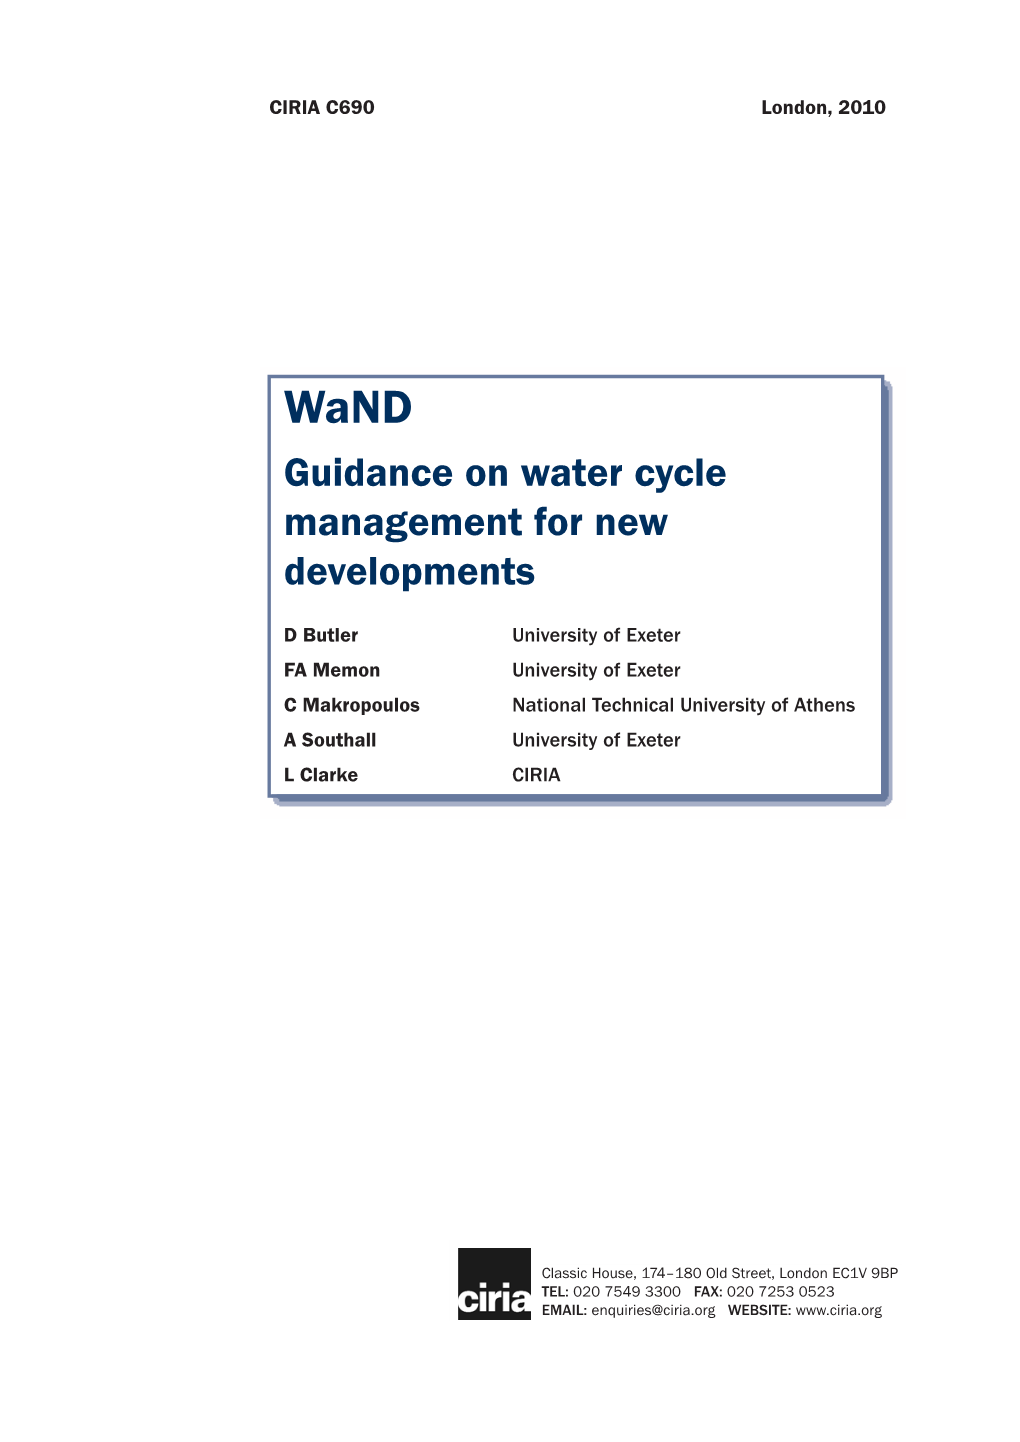 Guidance on Water Cycle Management for New Developments